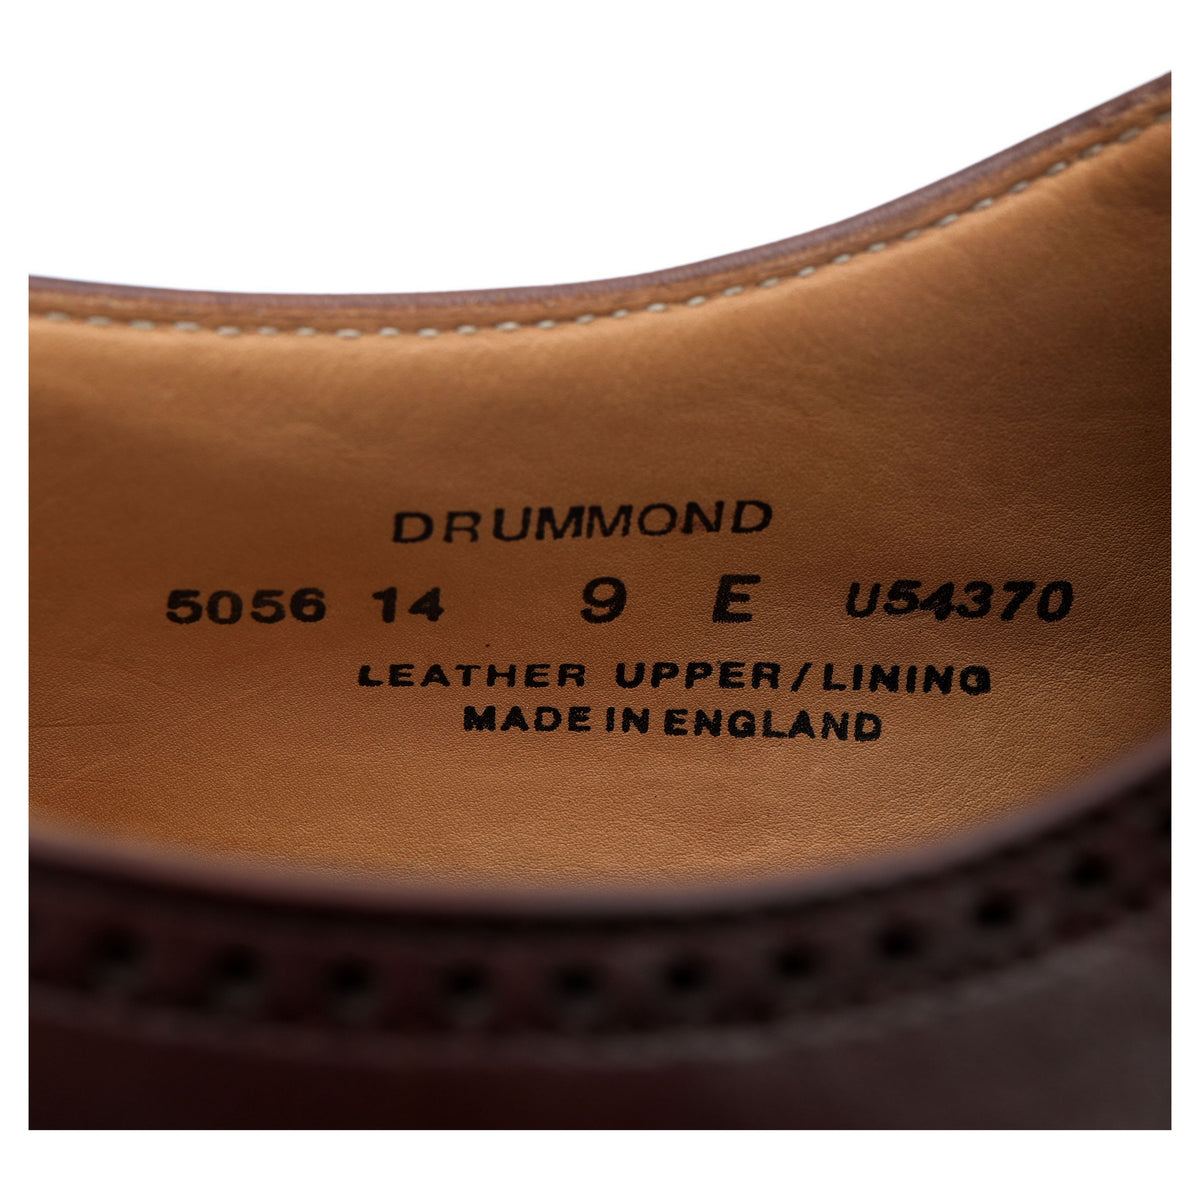 &#39;Drummond&#39; Dark Brown Leather Oxford Brogues UK 9 E